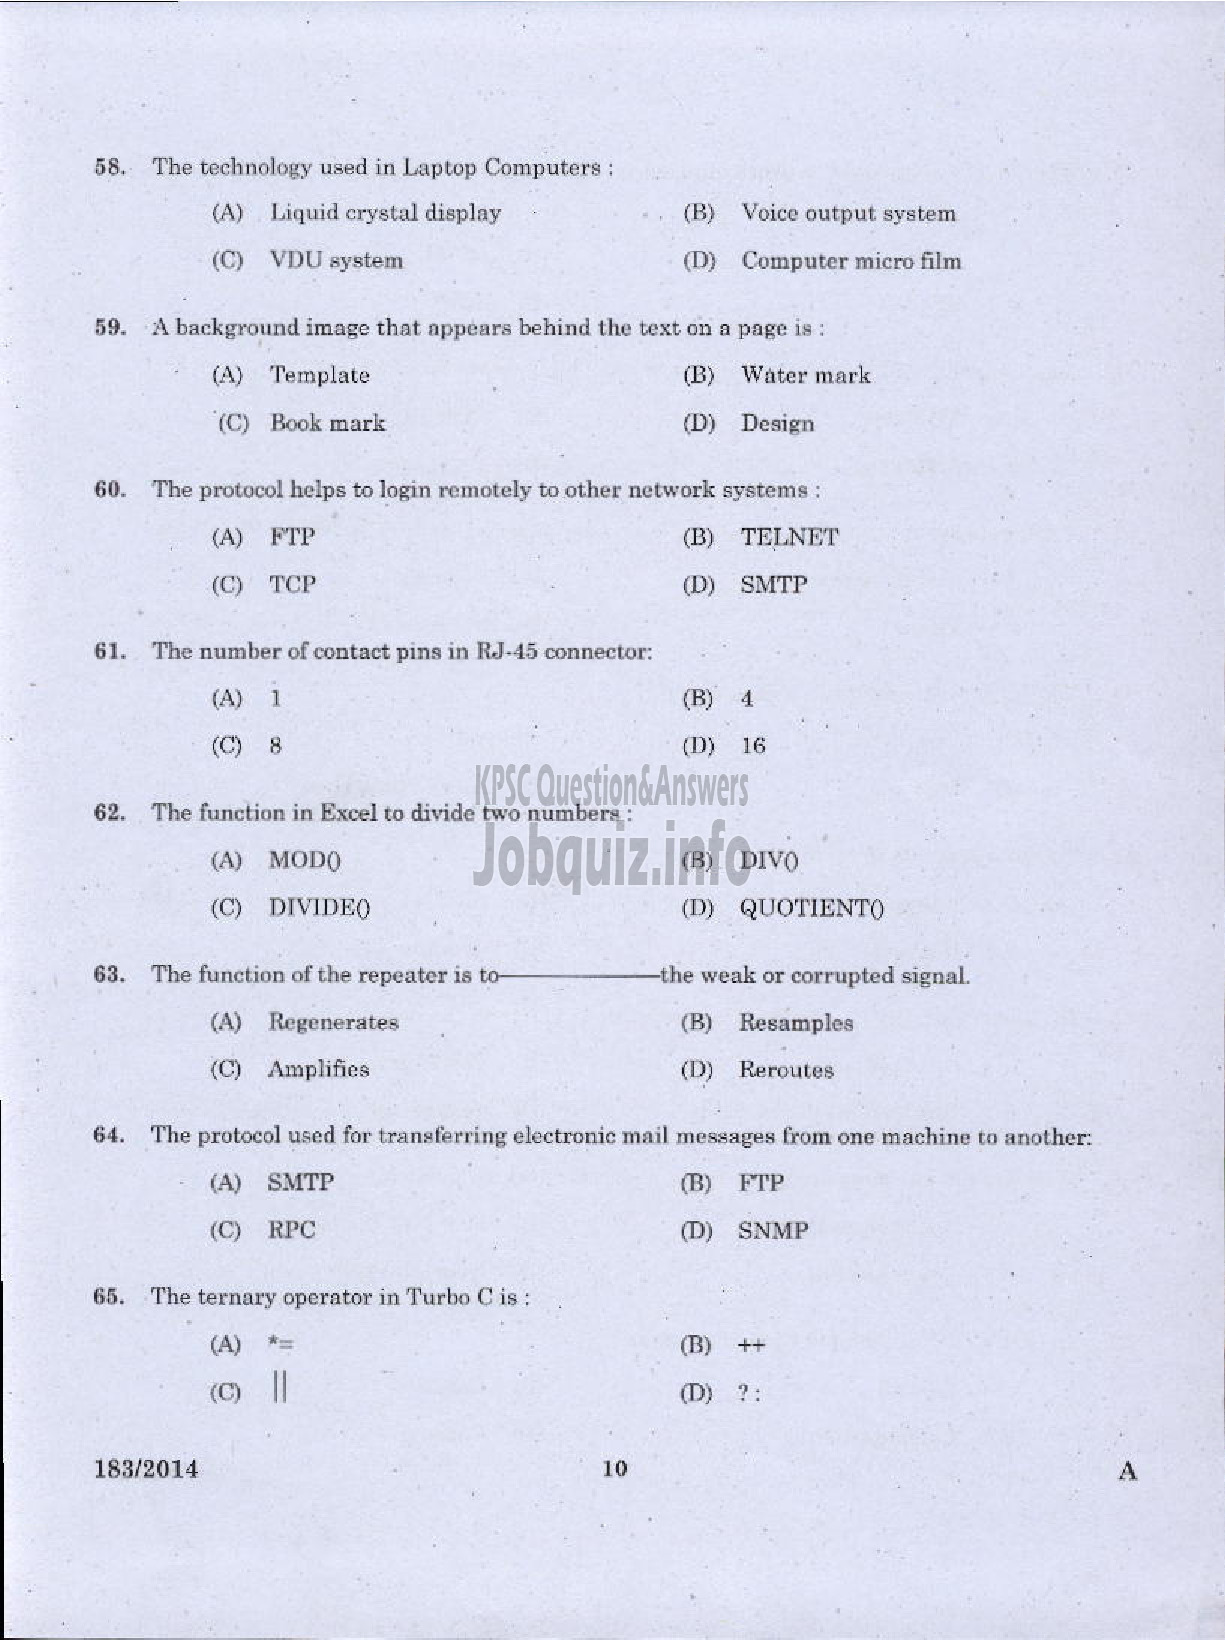 Kerala PSC Question Paper - TRADESMAN COMPUTER ENGINEERING TECHNICAL EDUCATION TVM KGD-8